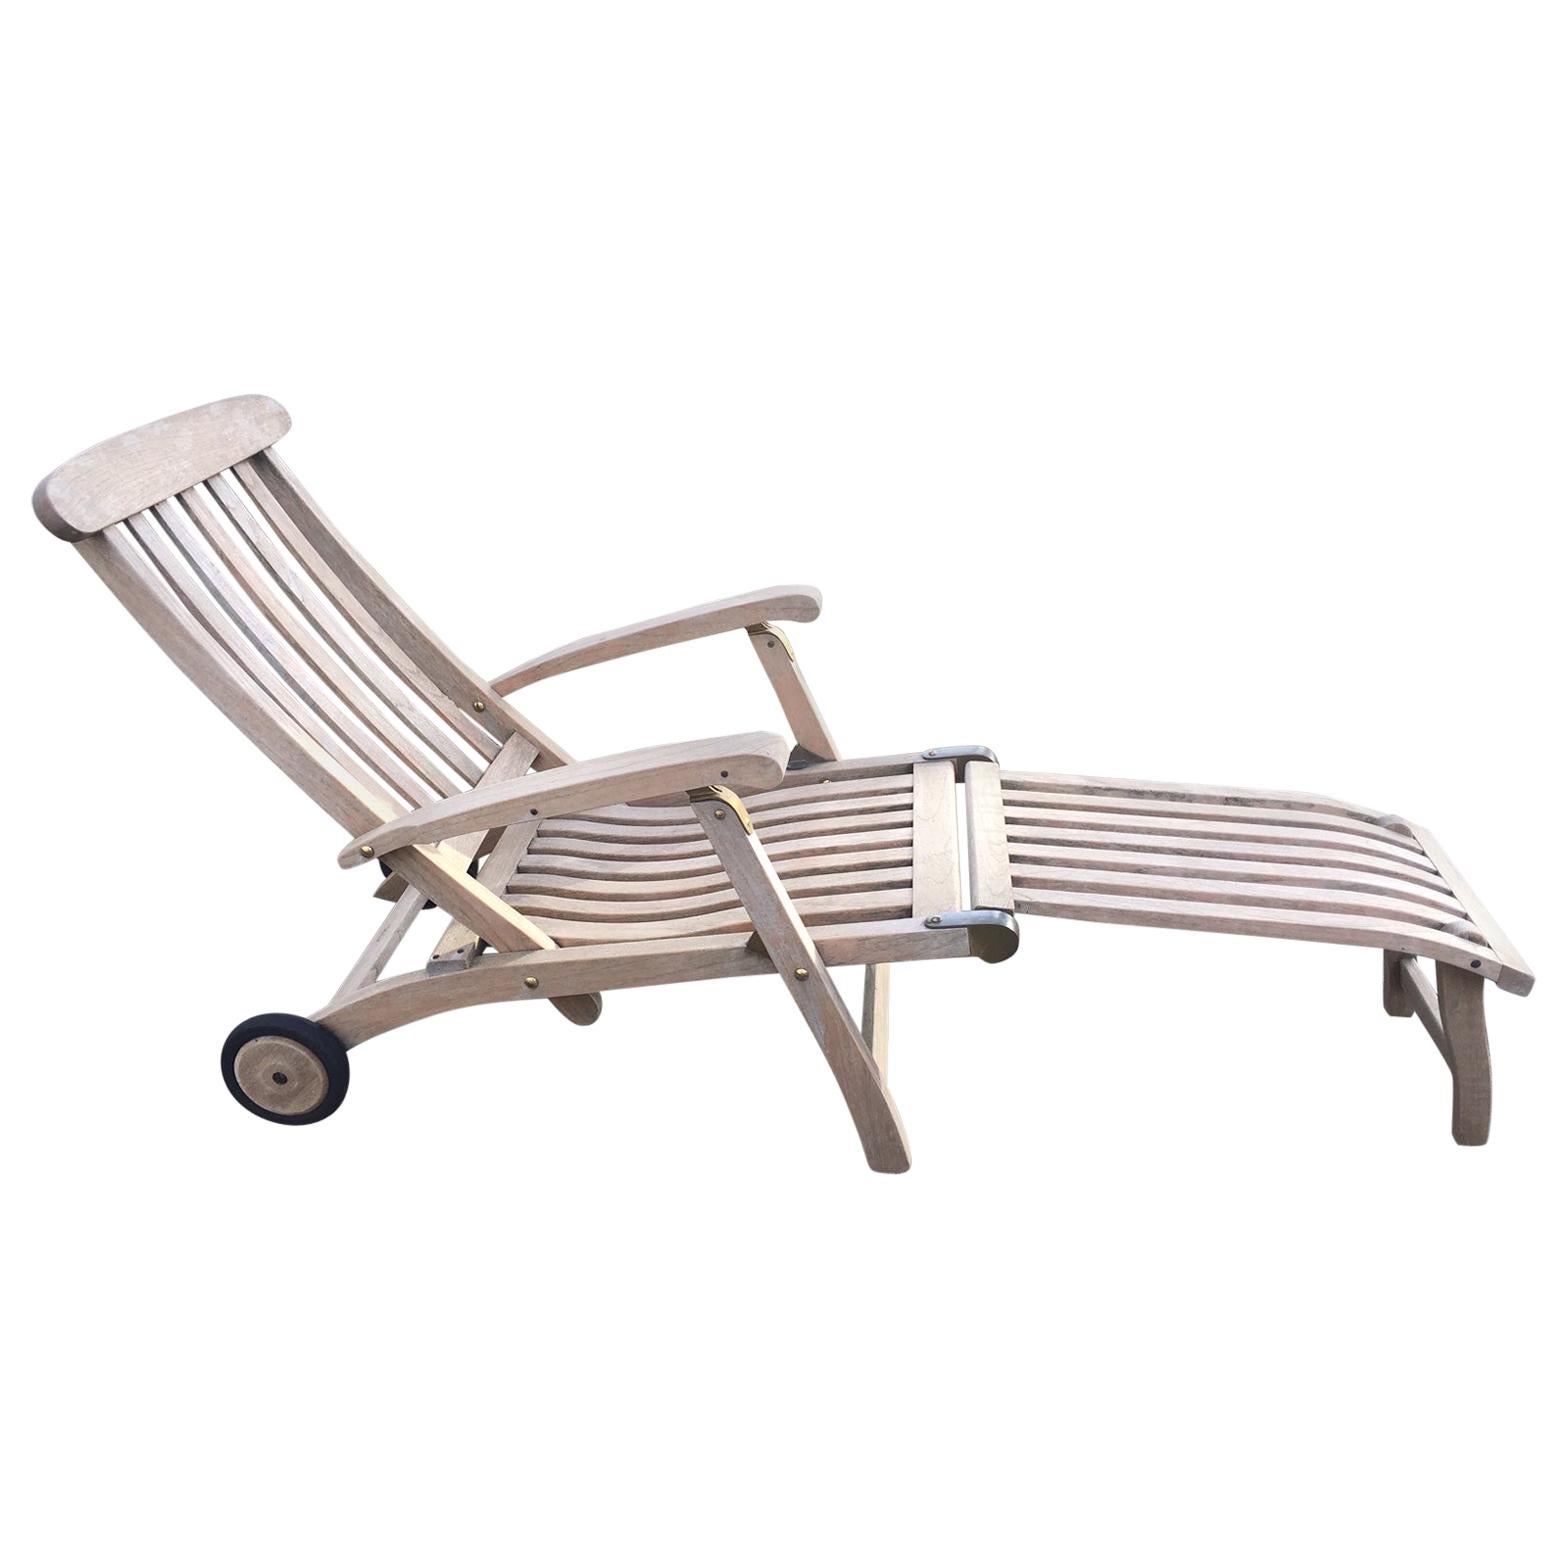 Outdoor Commodore Steamer Chair Chaise Longue by Barlow Tyrie